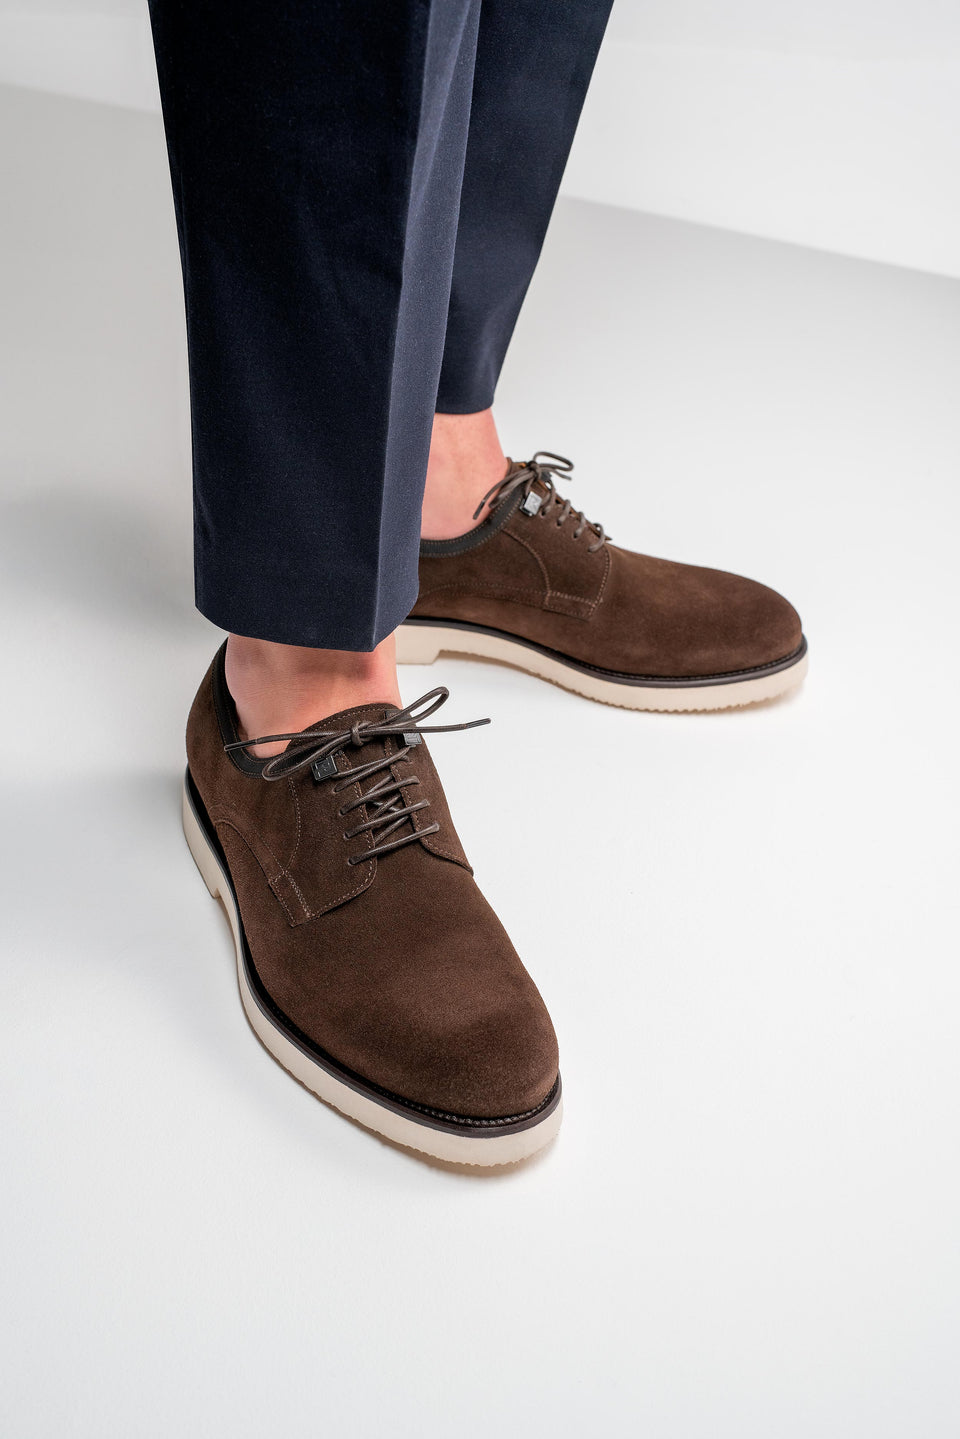 most comfortable brown suede shoes